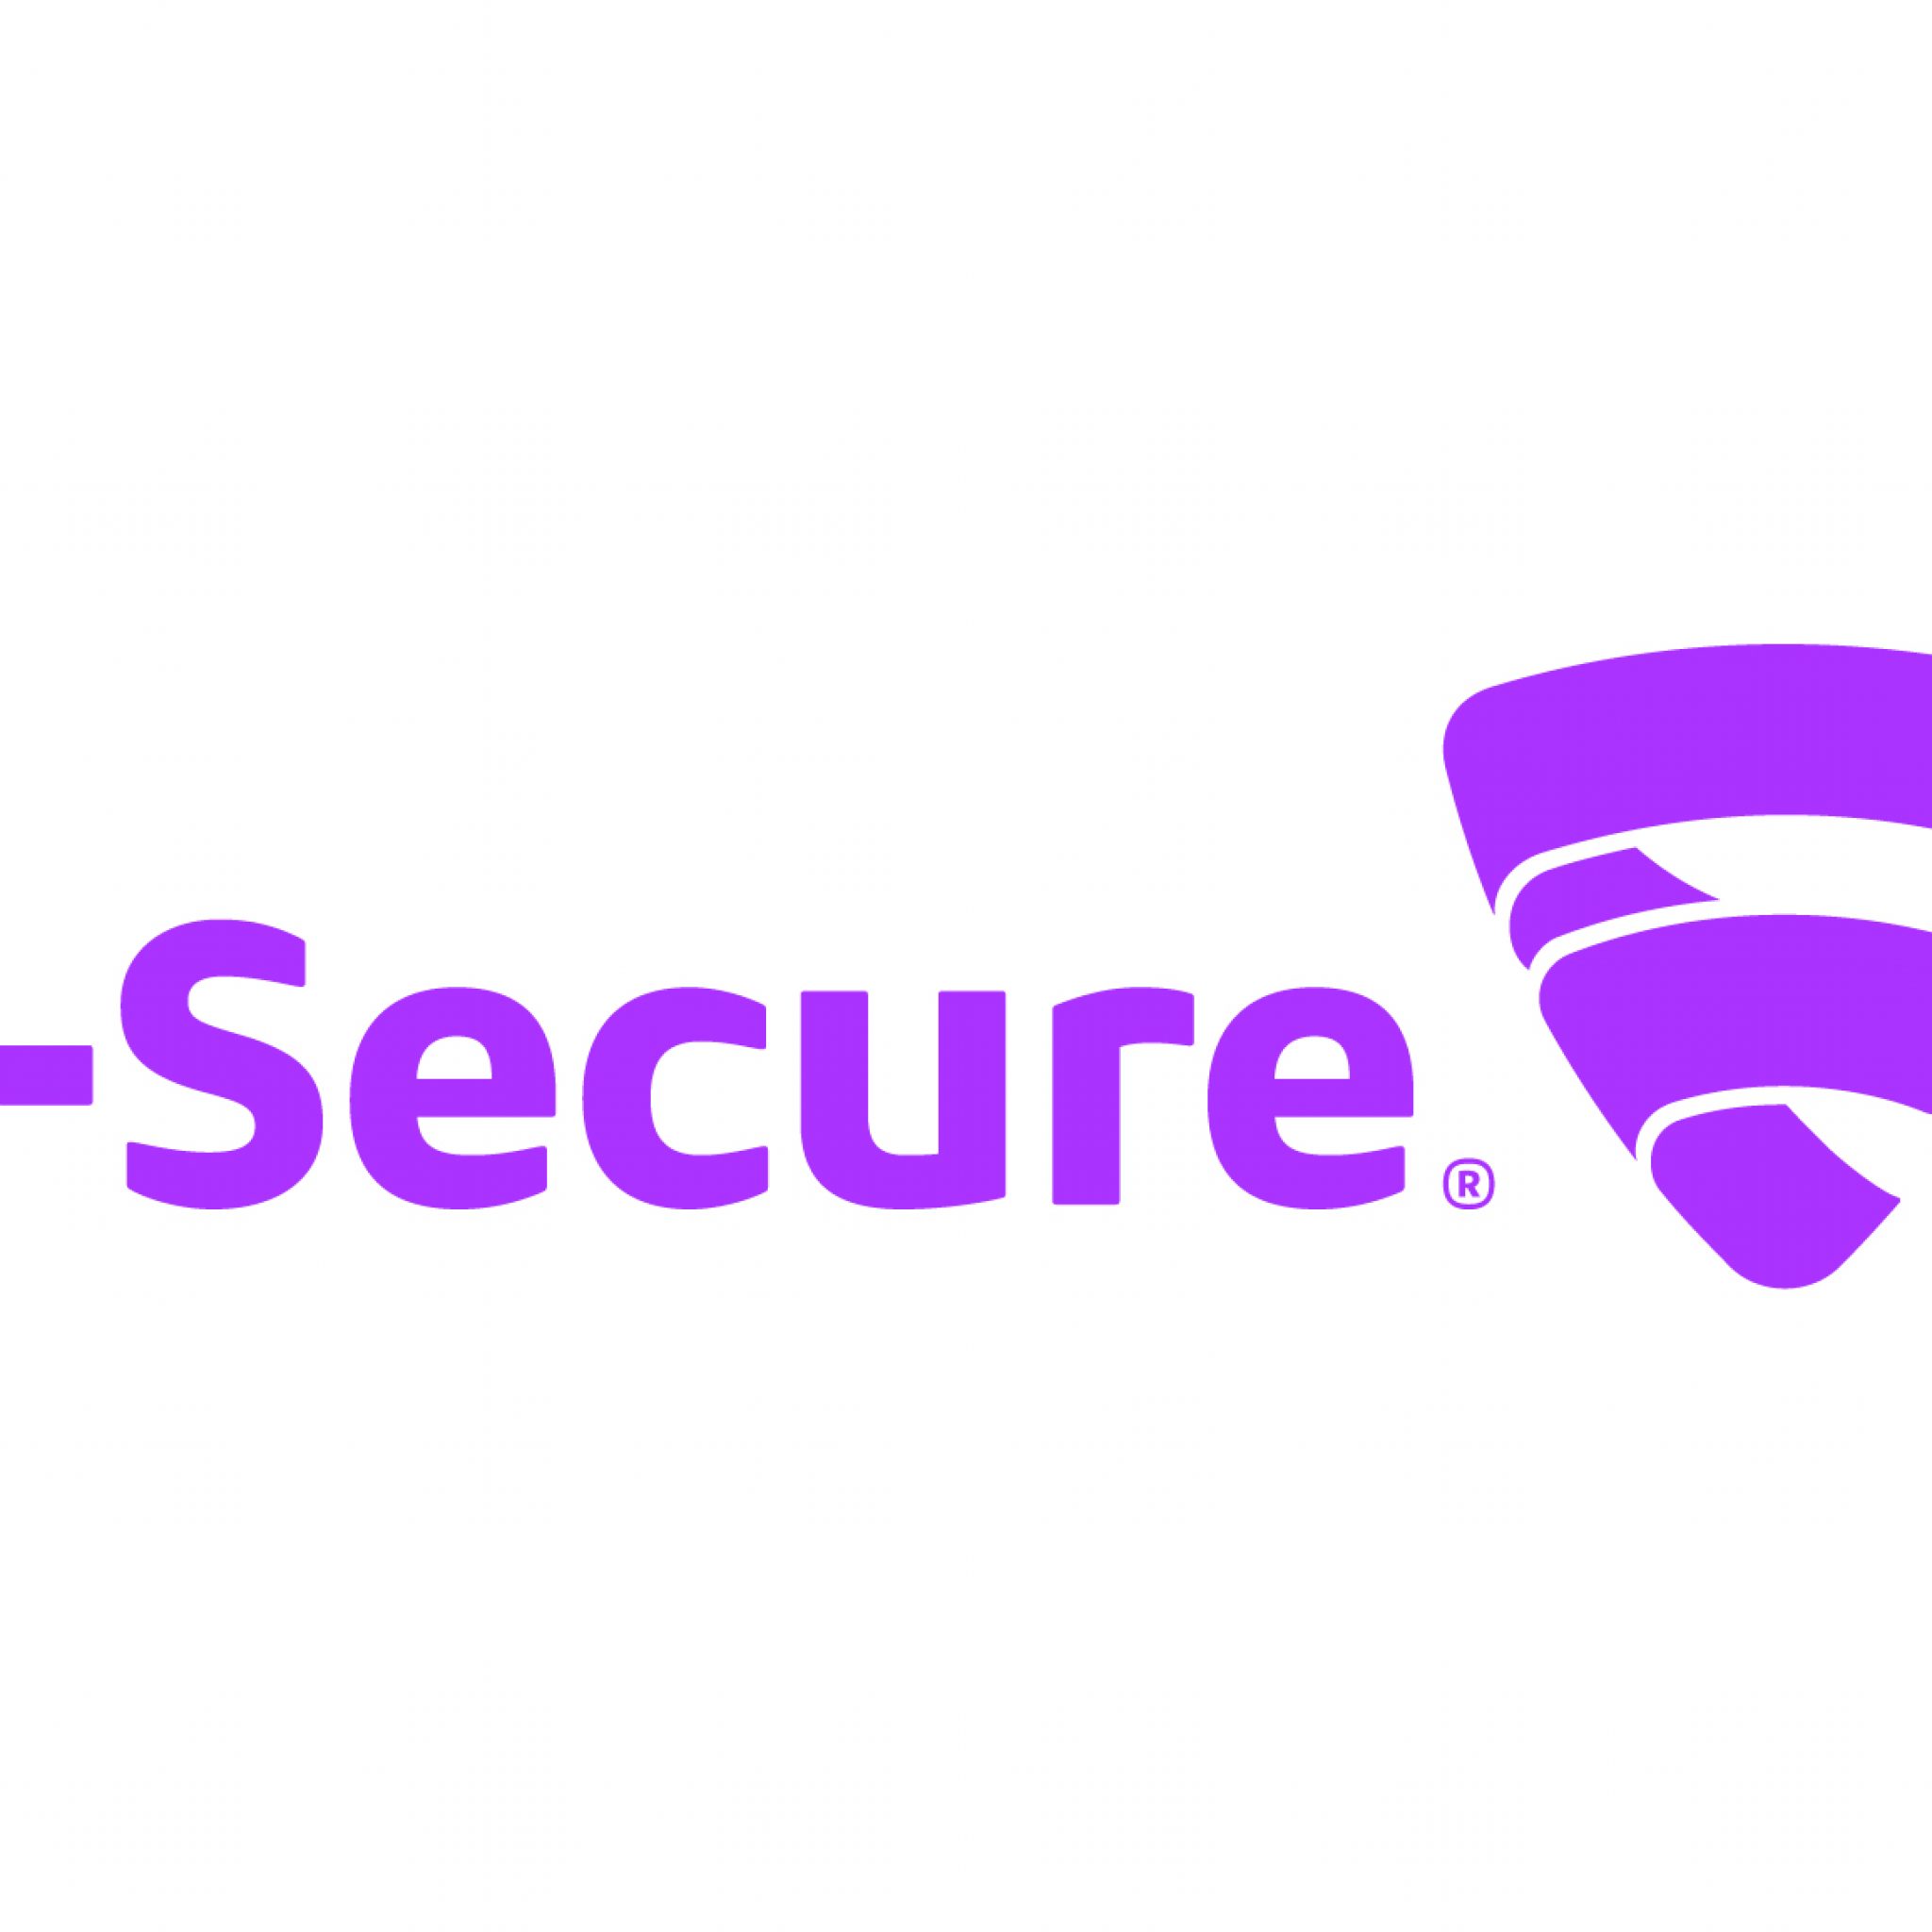 f secure 2015